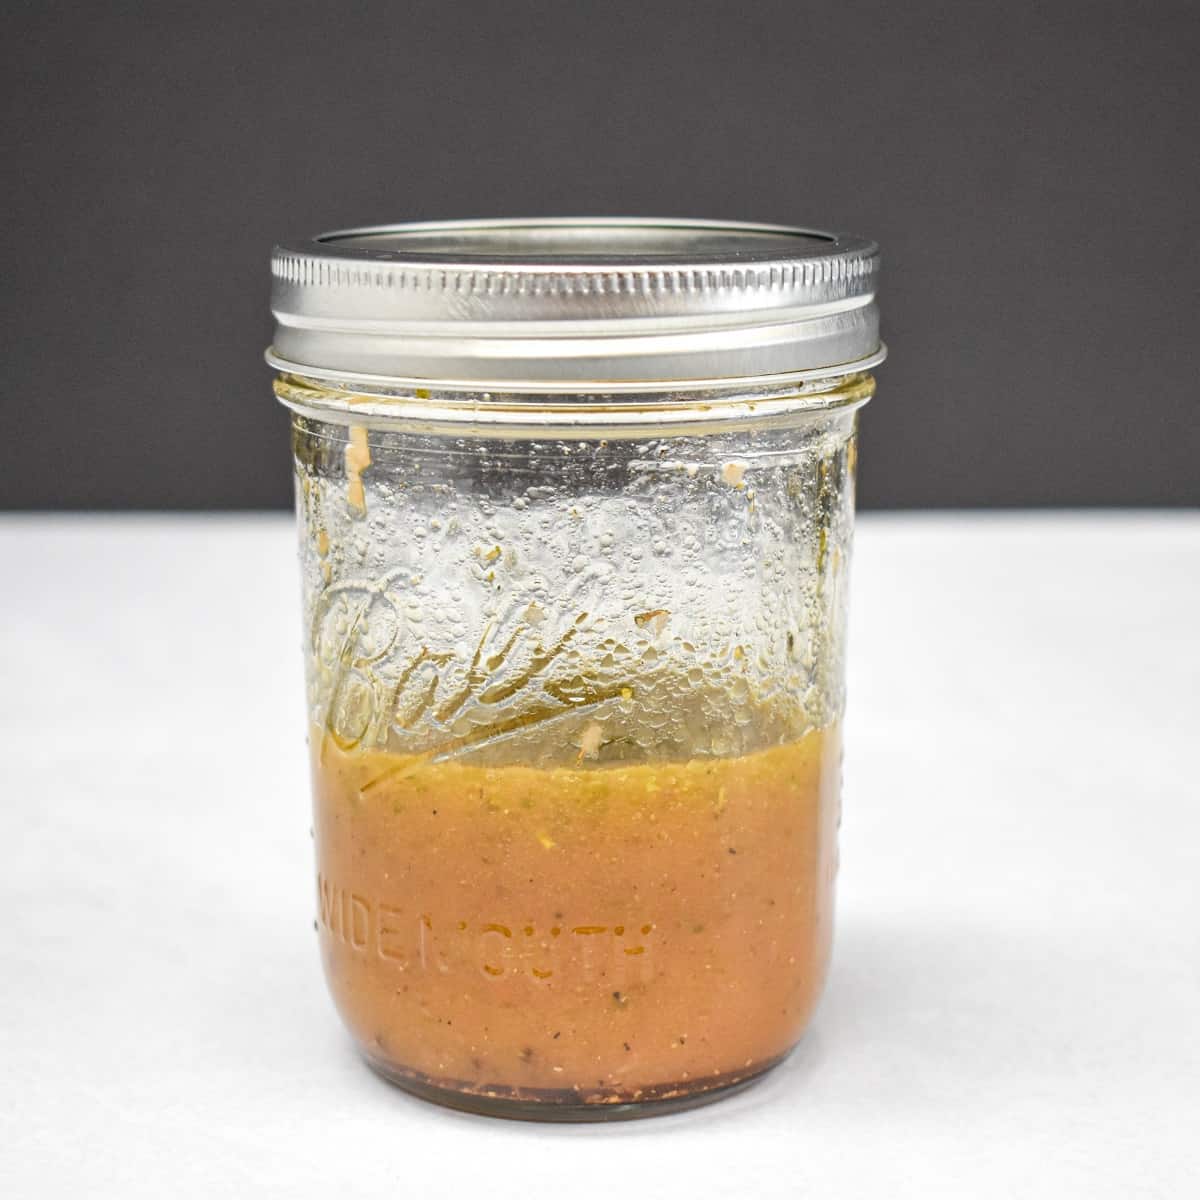 Homemade Italian dressing in a canning jar.